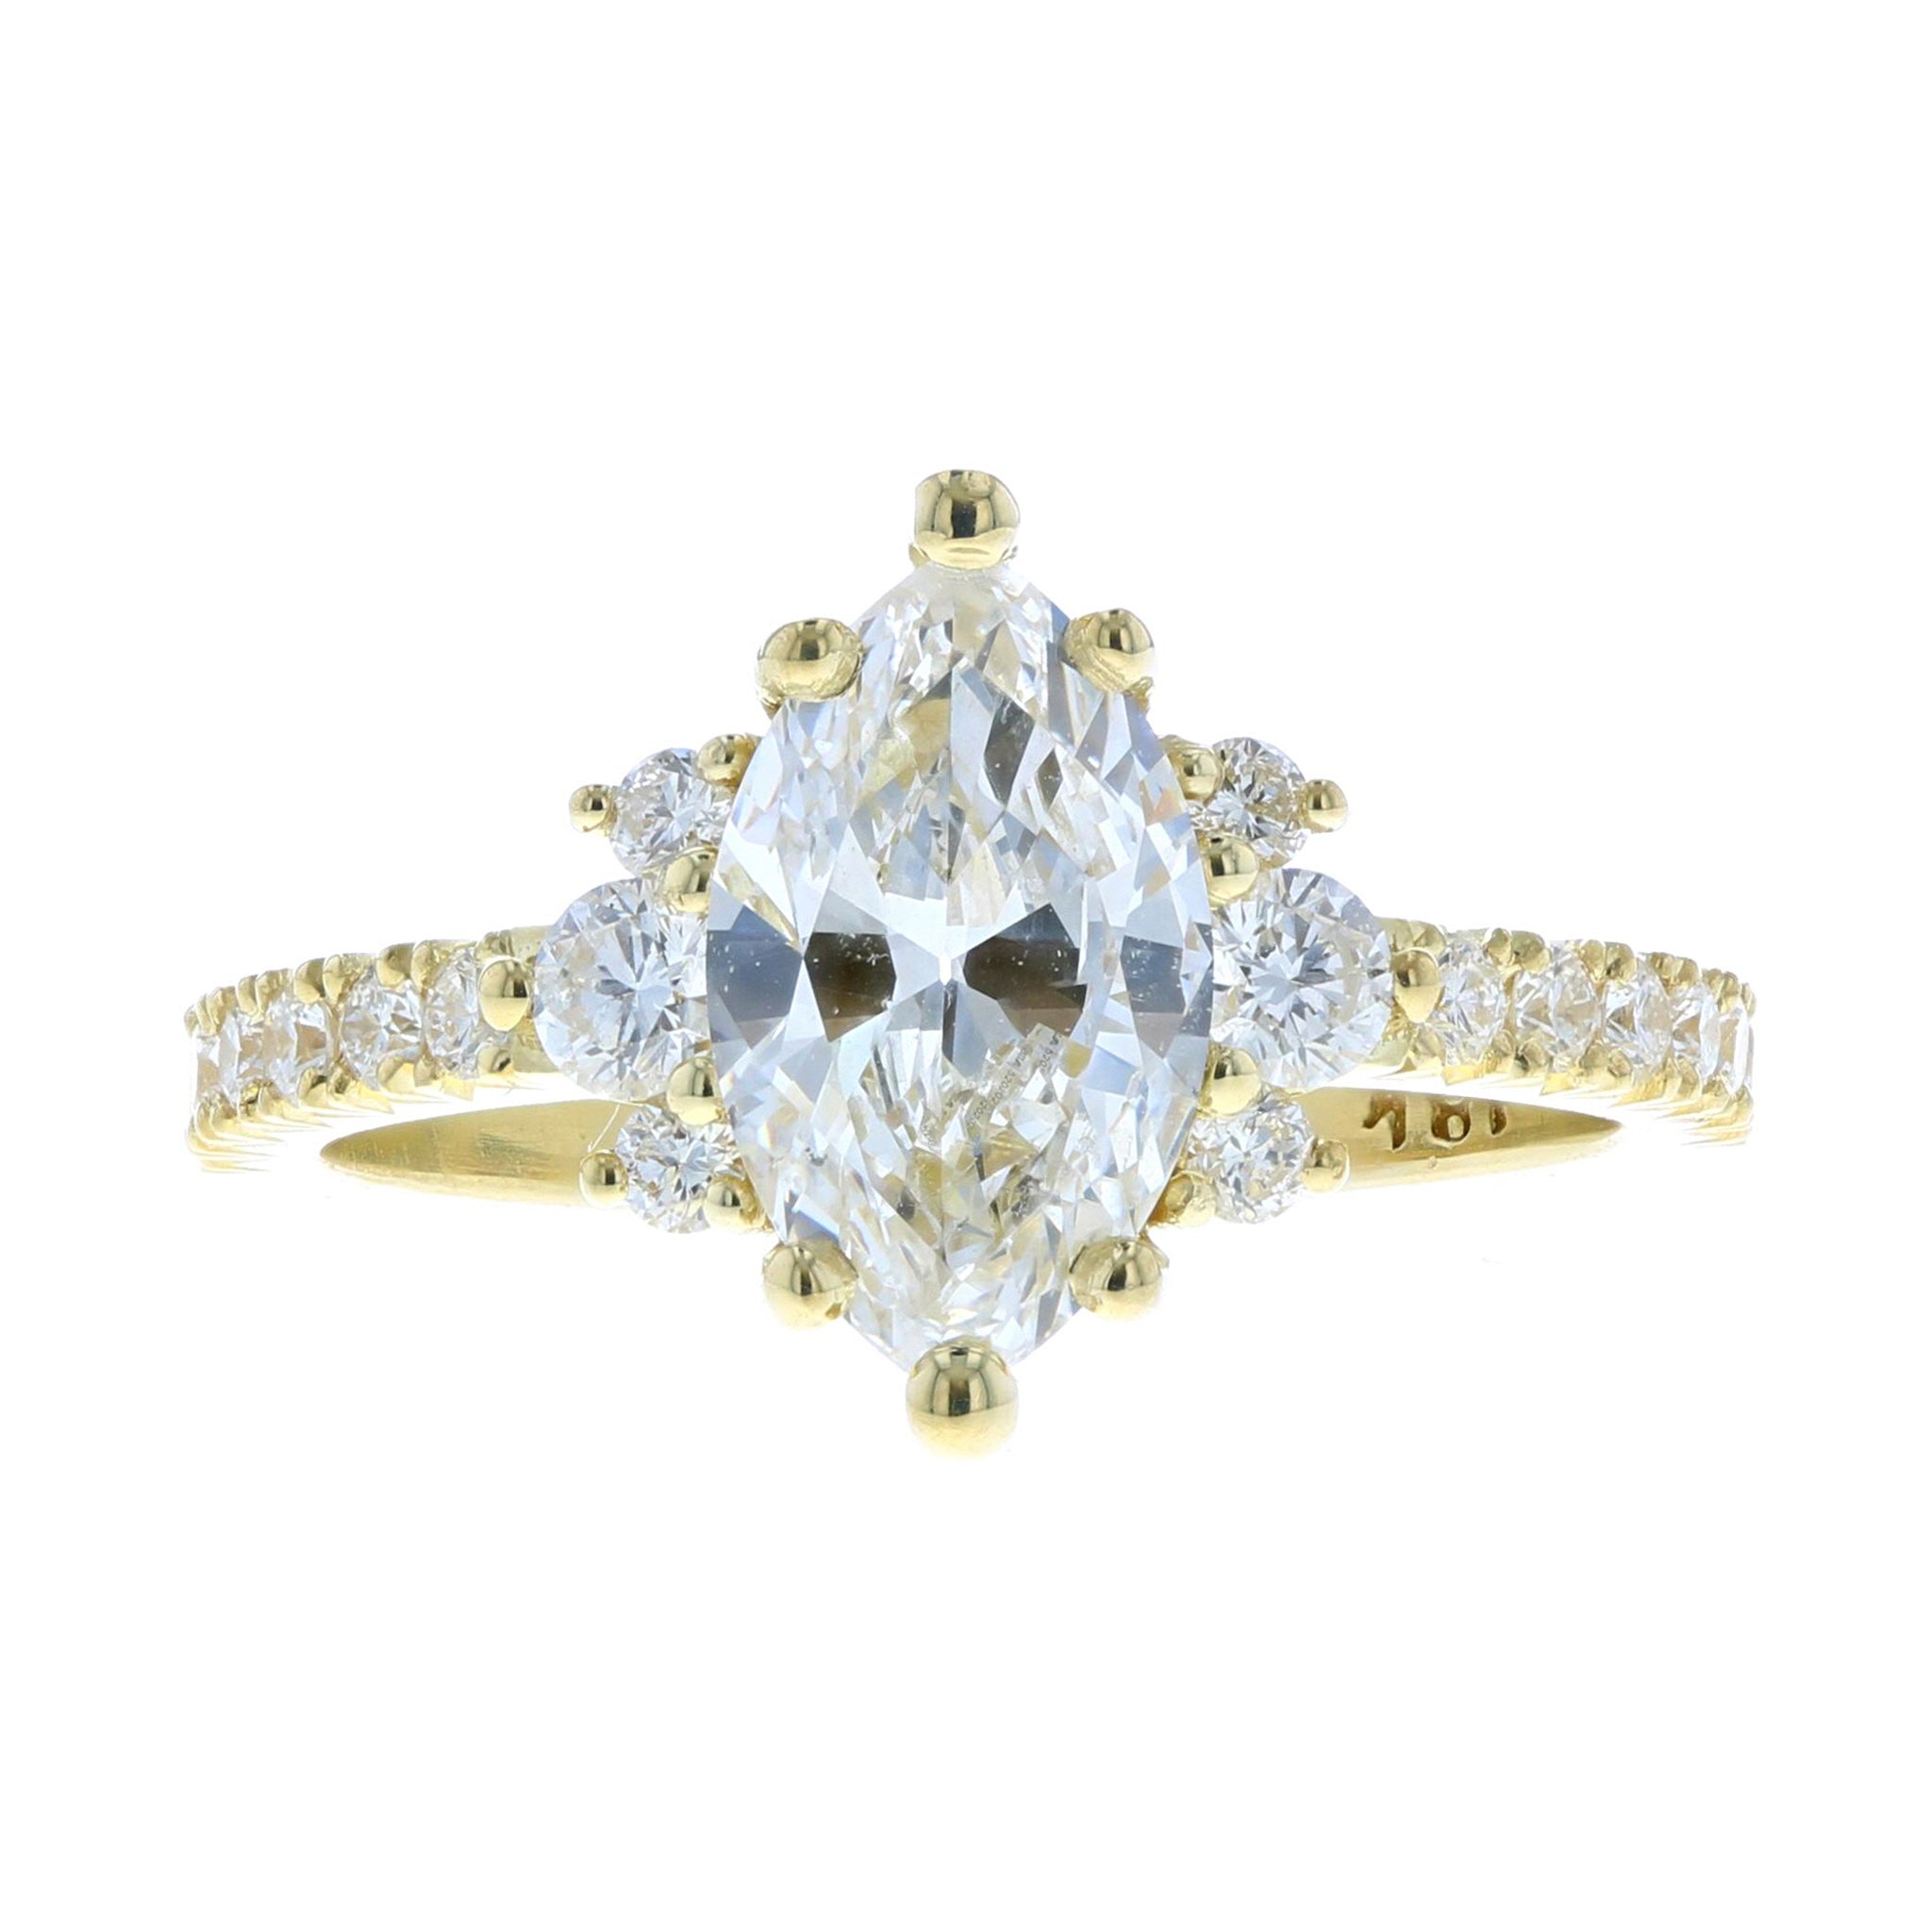 Marquise Diamond Engagement Ring with Side Stones and Scalloped Halo